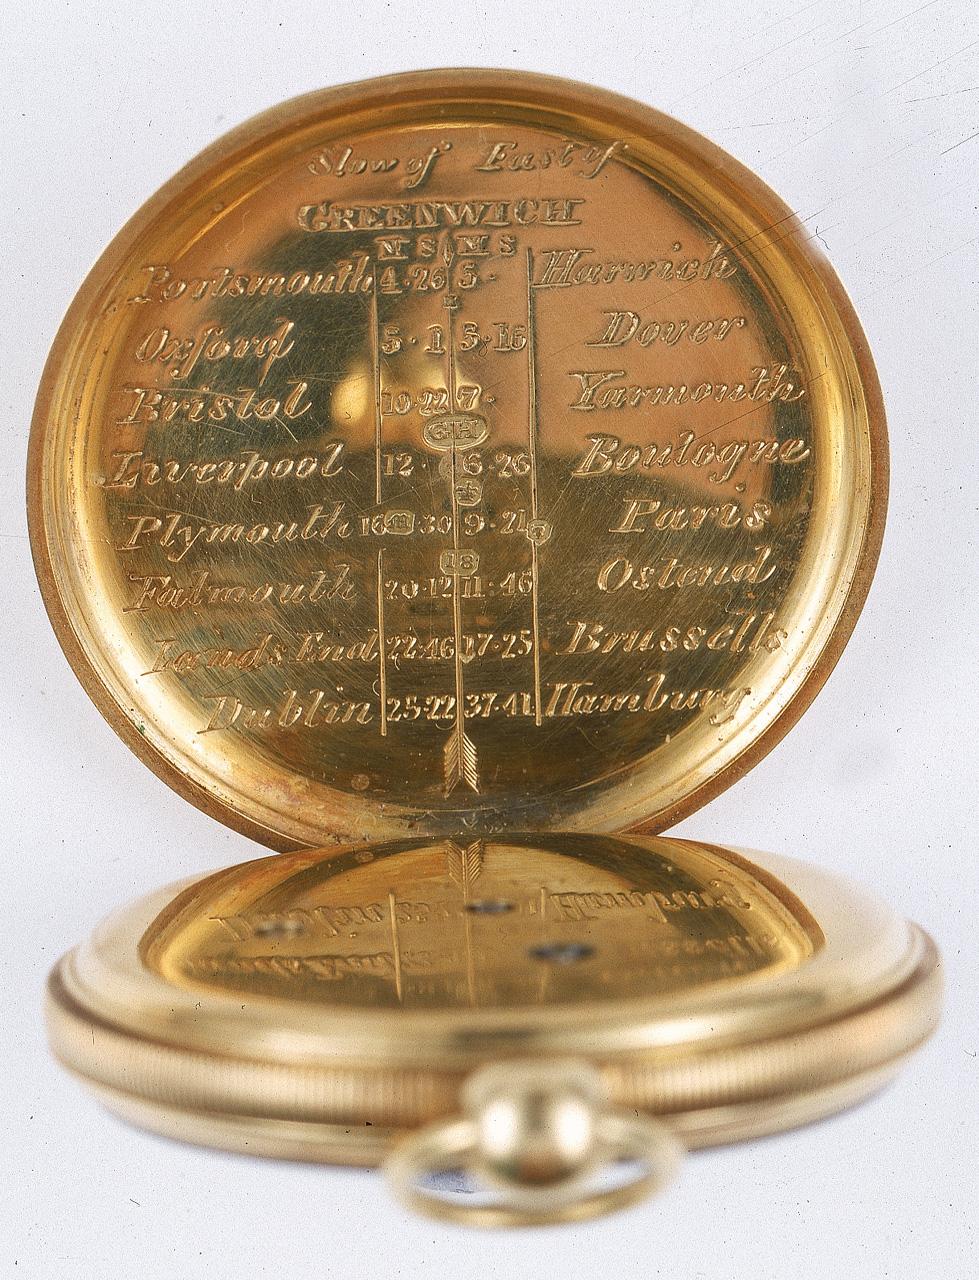 Image of inside of a gold watch, it has locations and time differences engraved on it